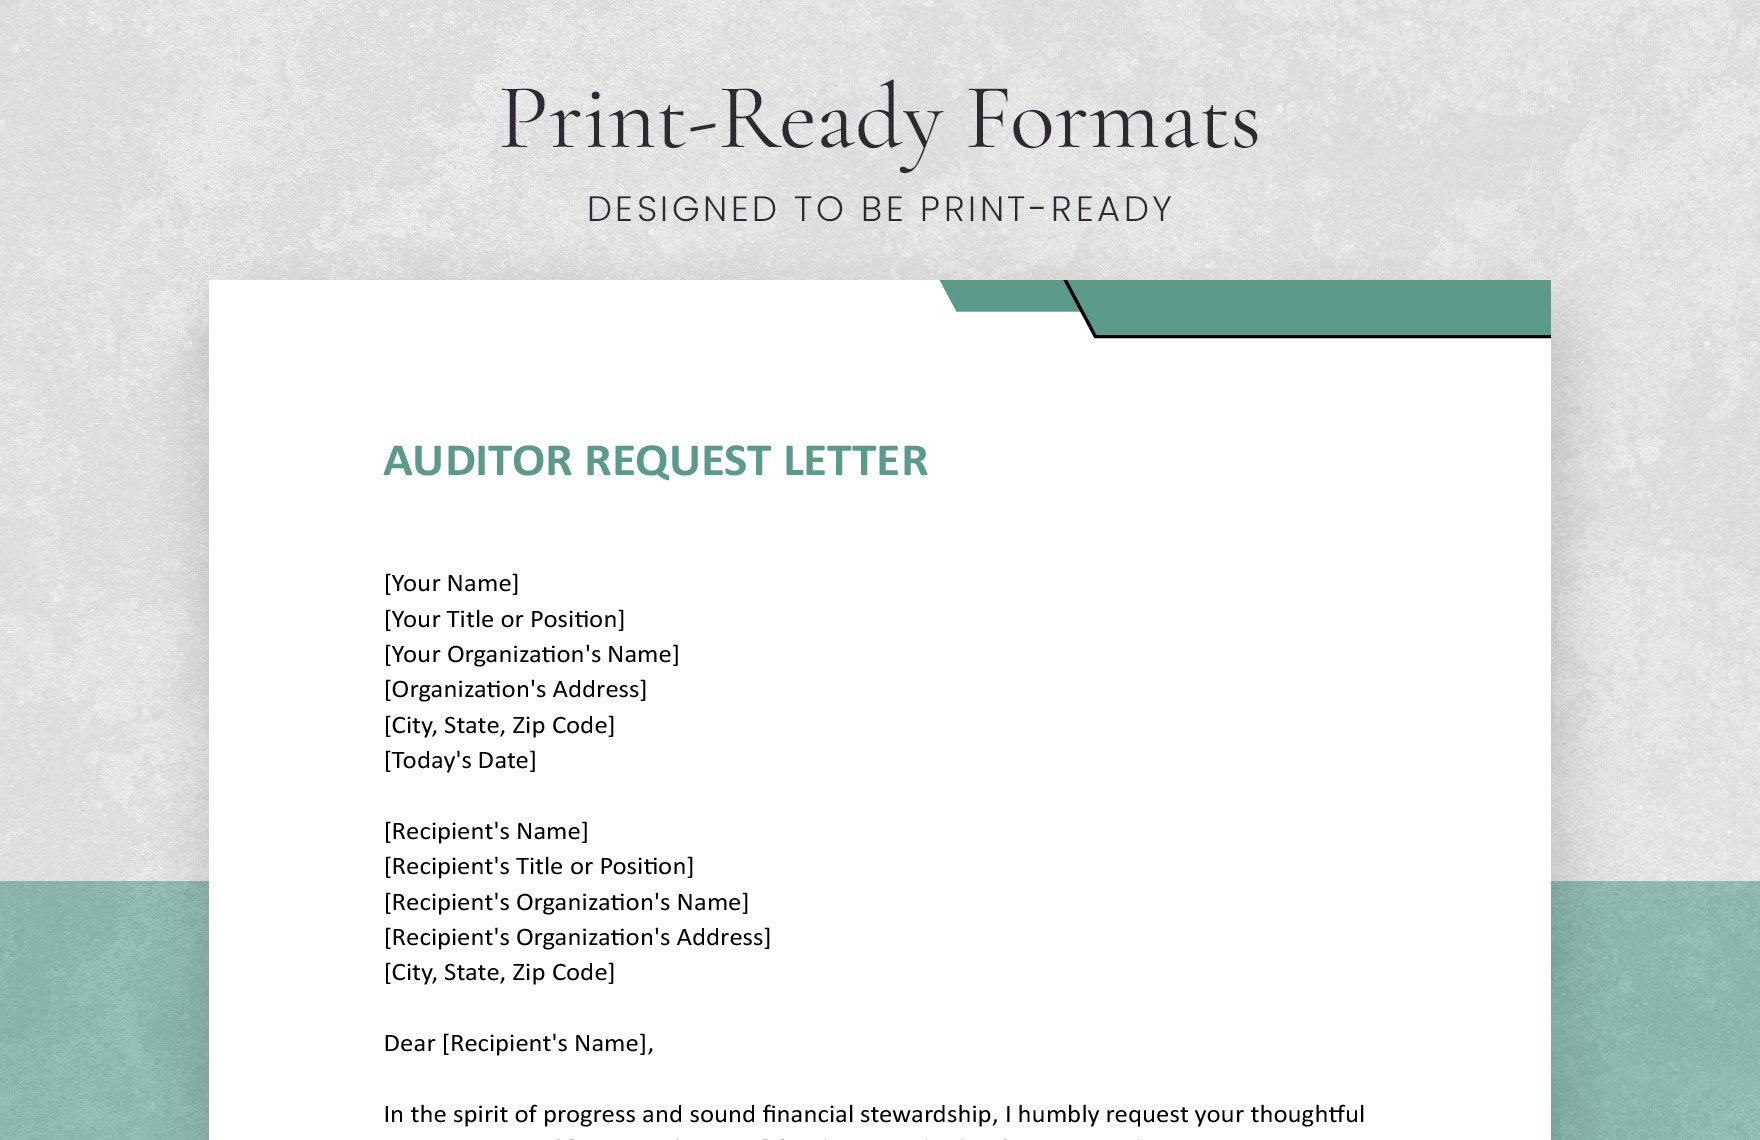 Auditor Request Letter